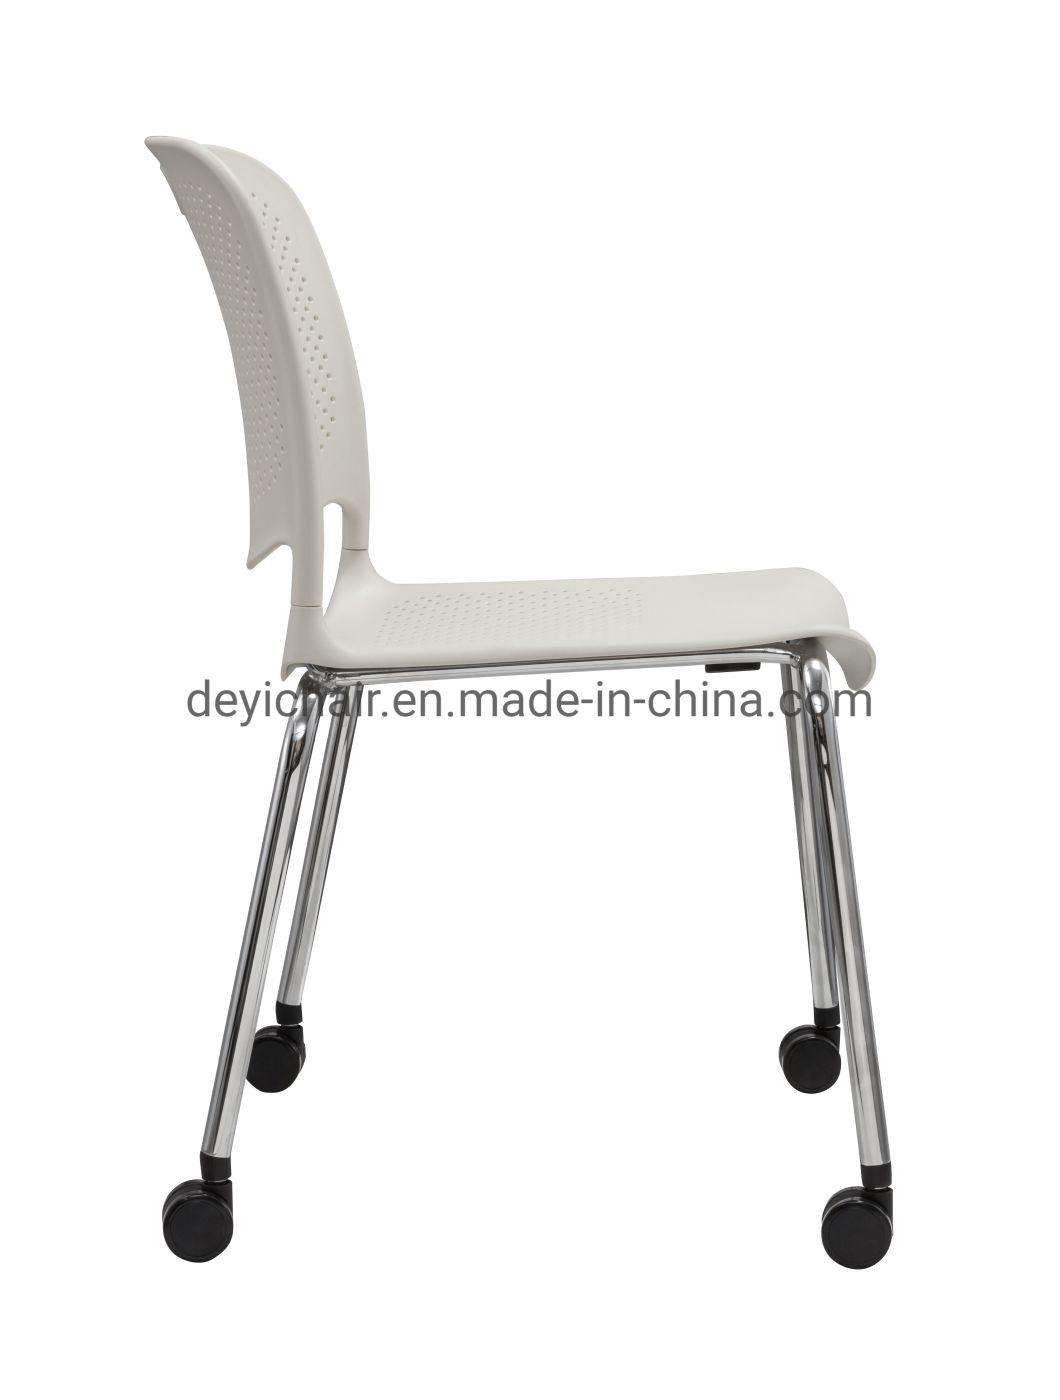 White Color Plastic Shell with Seat Cushion Chromed Finished 4 Legs Frame Stool with Seat Cushion Chair with Casters